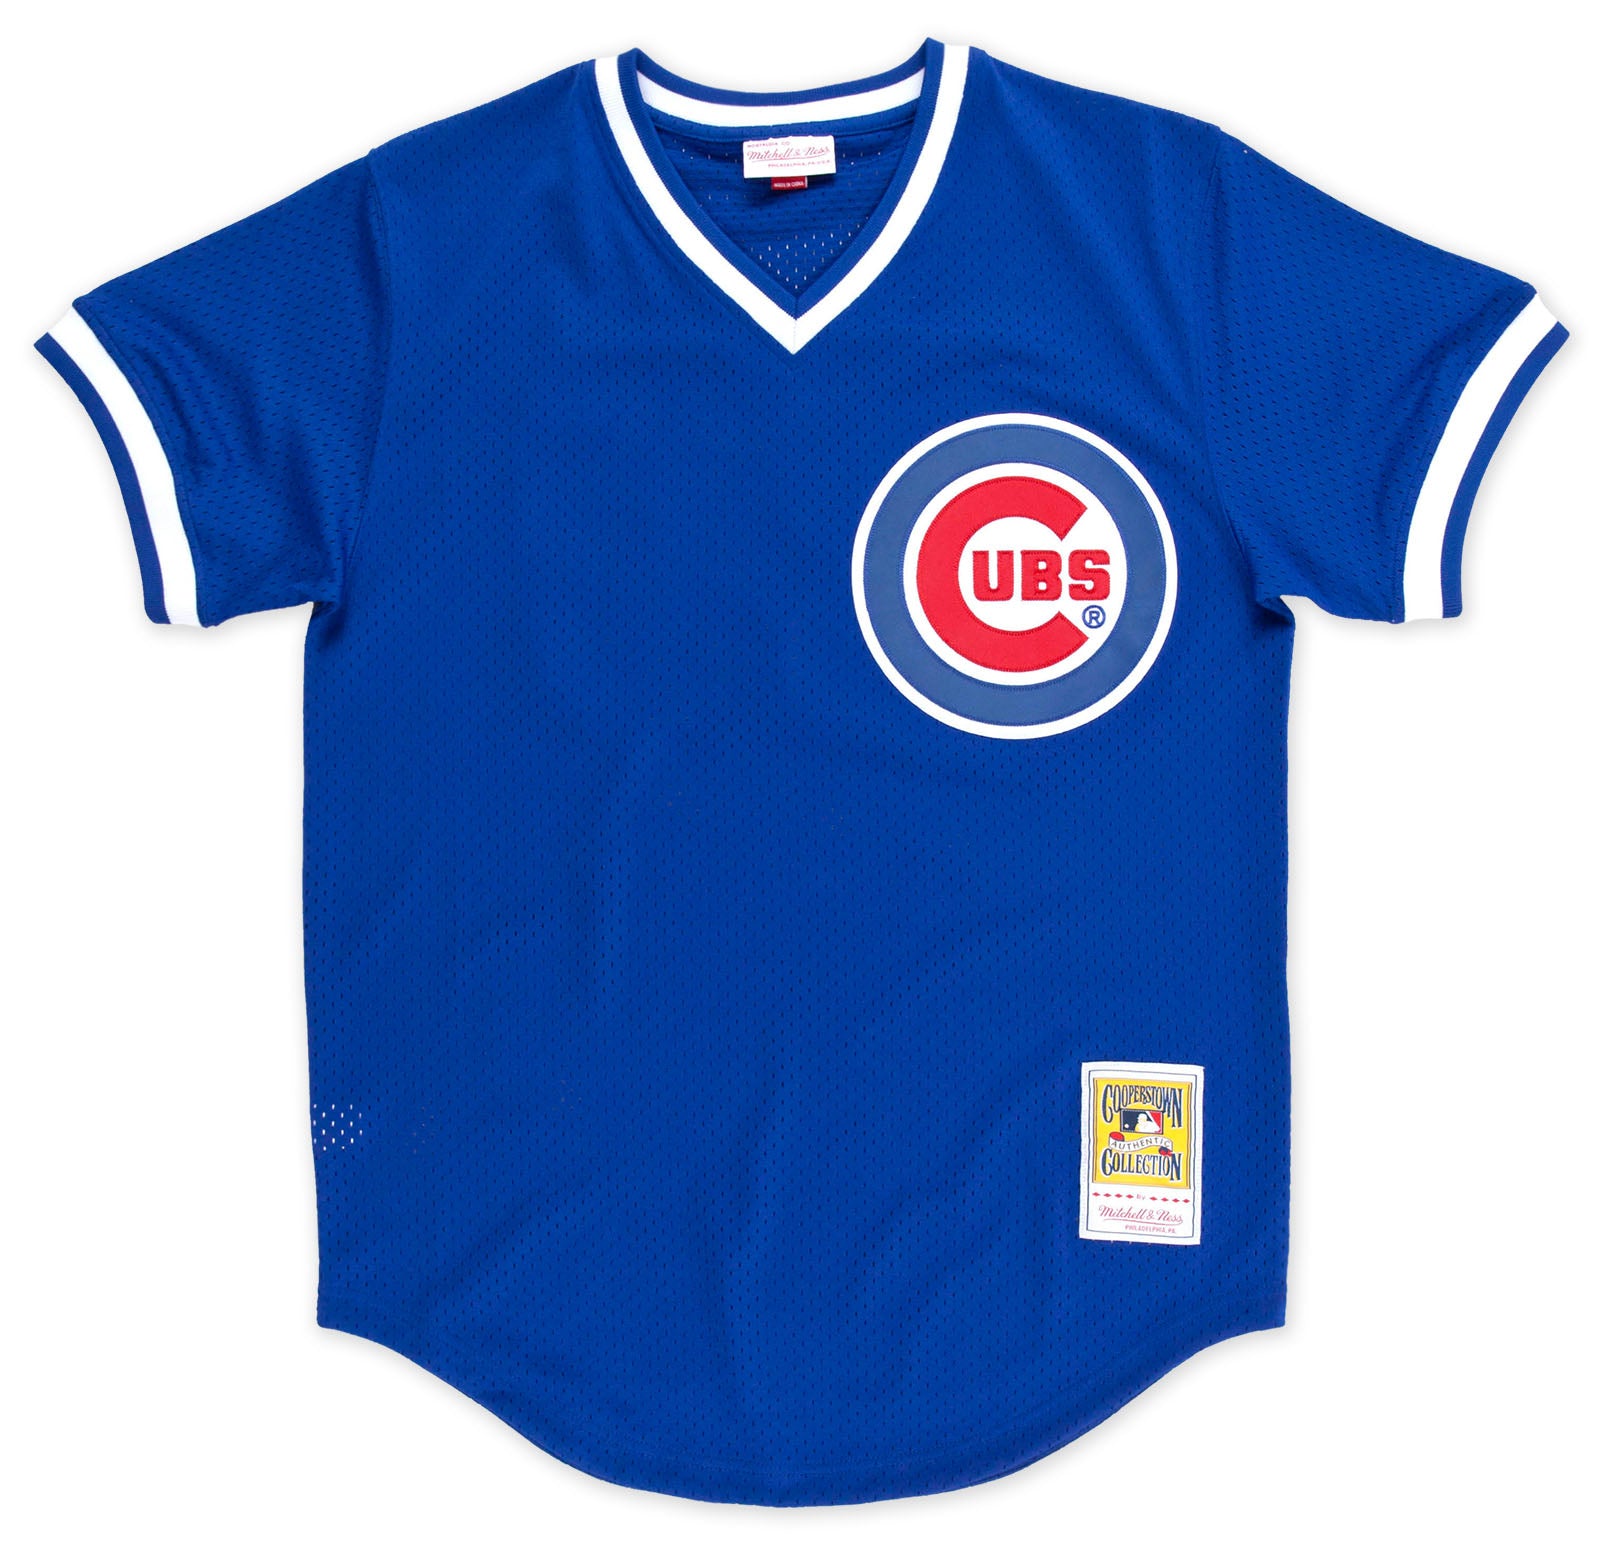 Men's Chicago Cubs Mitchell & Ness Royal Mesh V-Neck Jersey